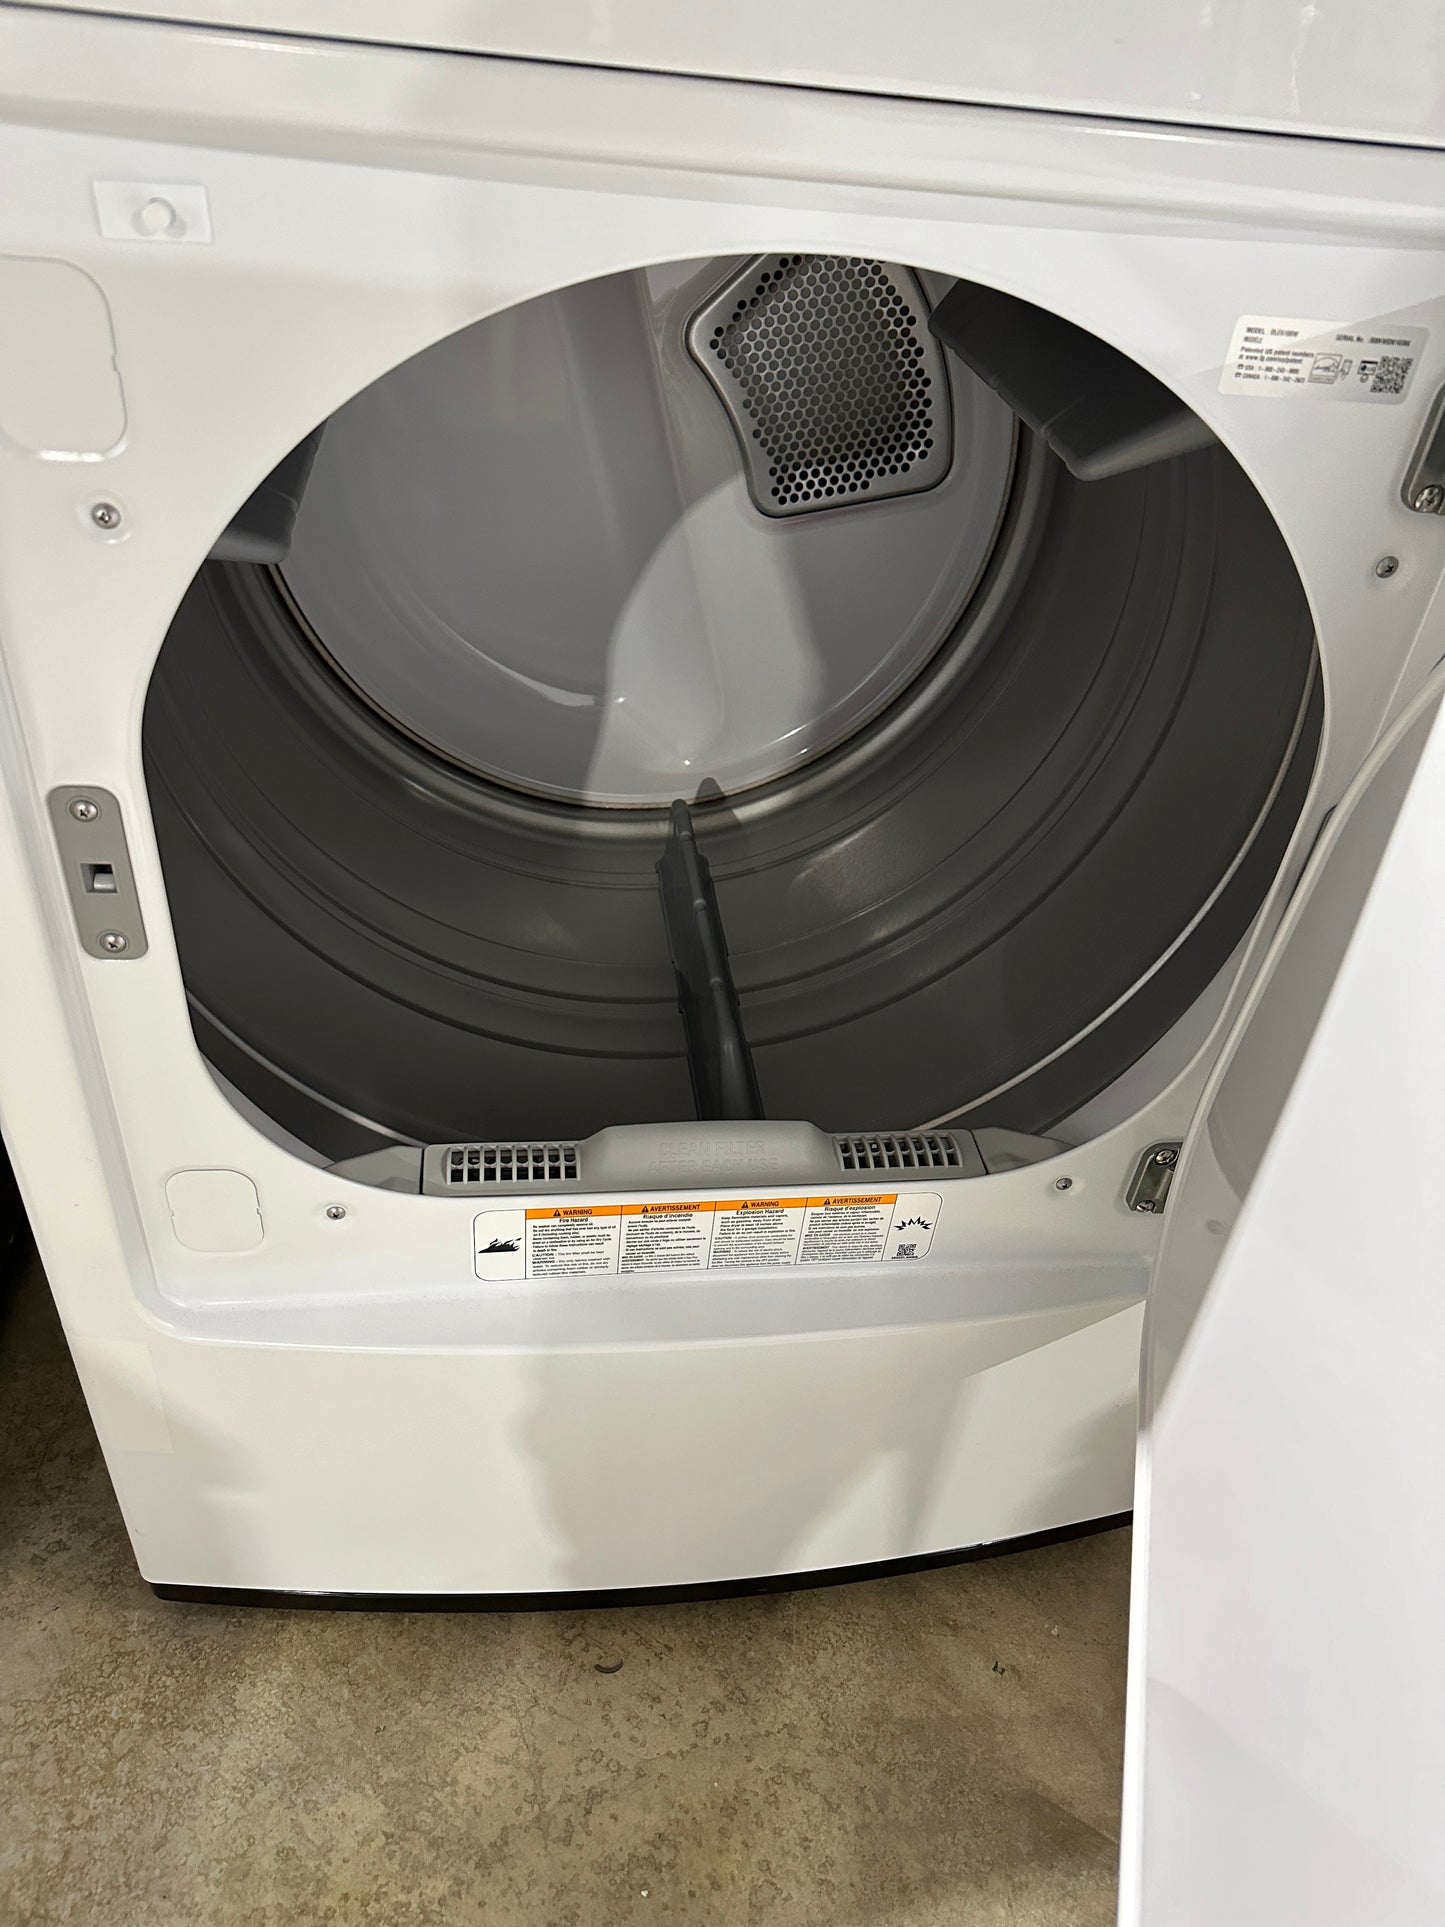 BRAND NEW LG SMART ELECTRIC DRYER MODEL: DLE6100W DRY12110S